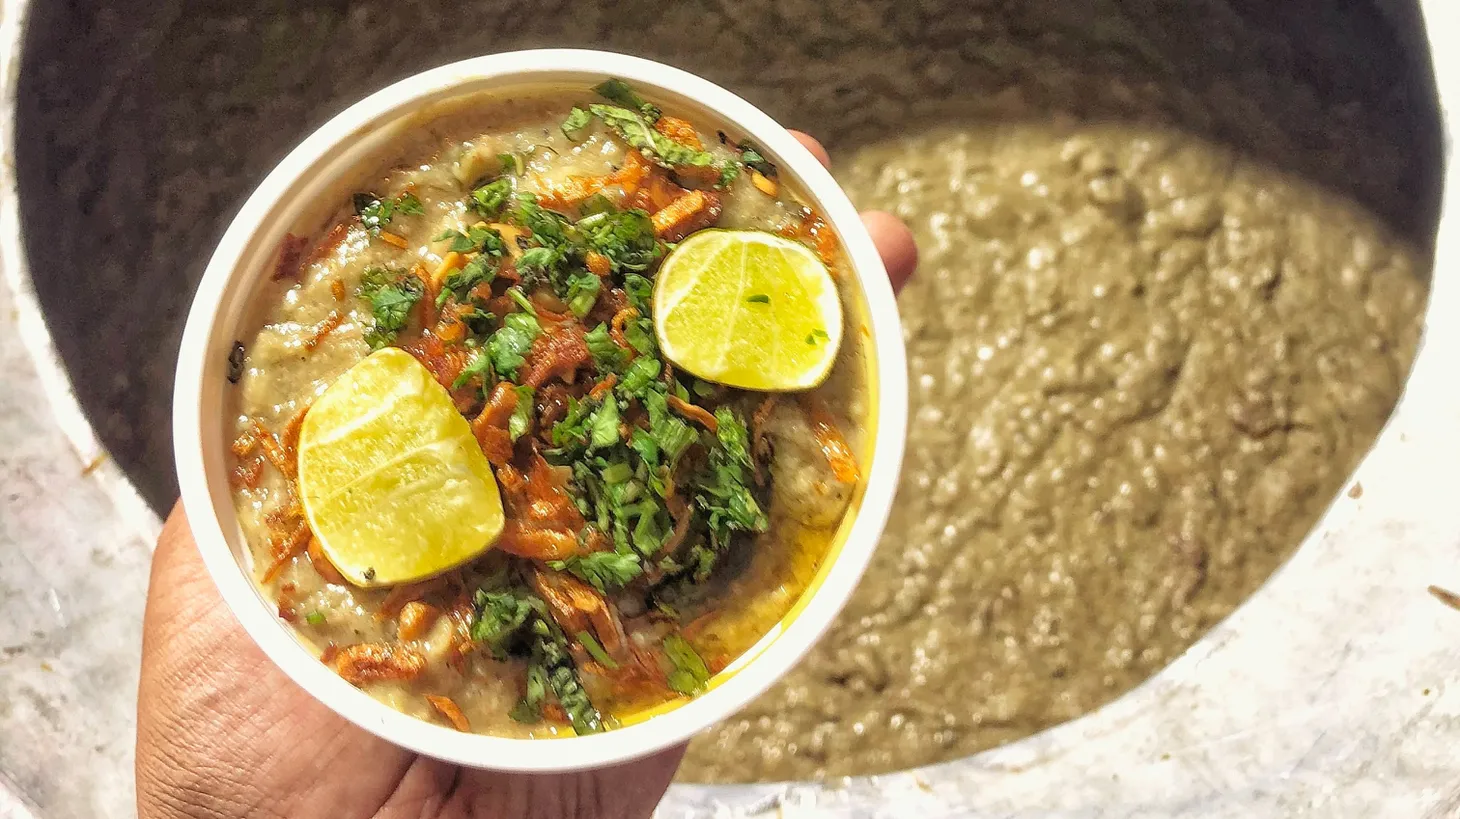 Writer Anusha Kulal says people will travel great distances to try different types of haleem, like the bowl served at the Hotel Peshawar.